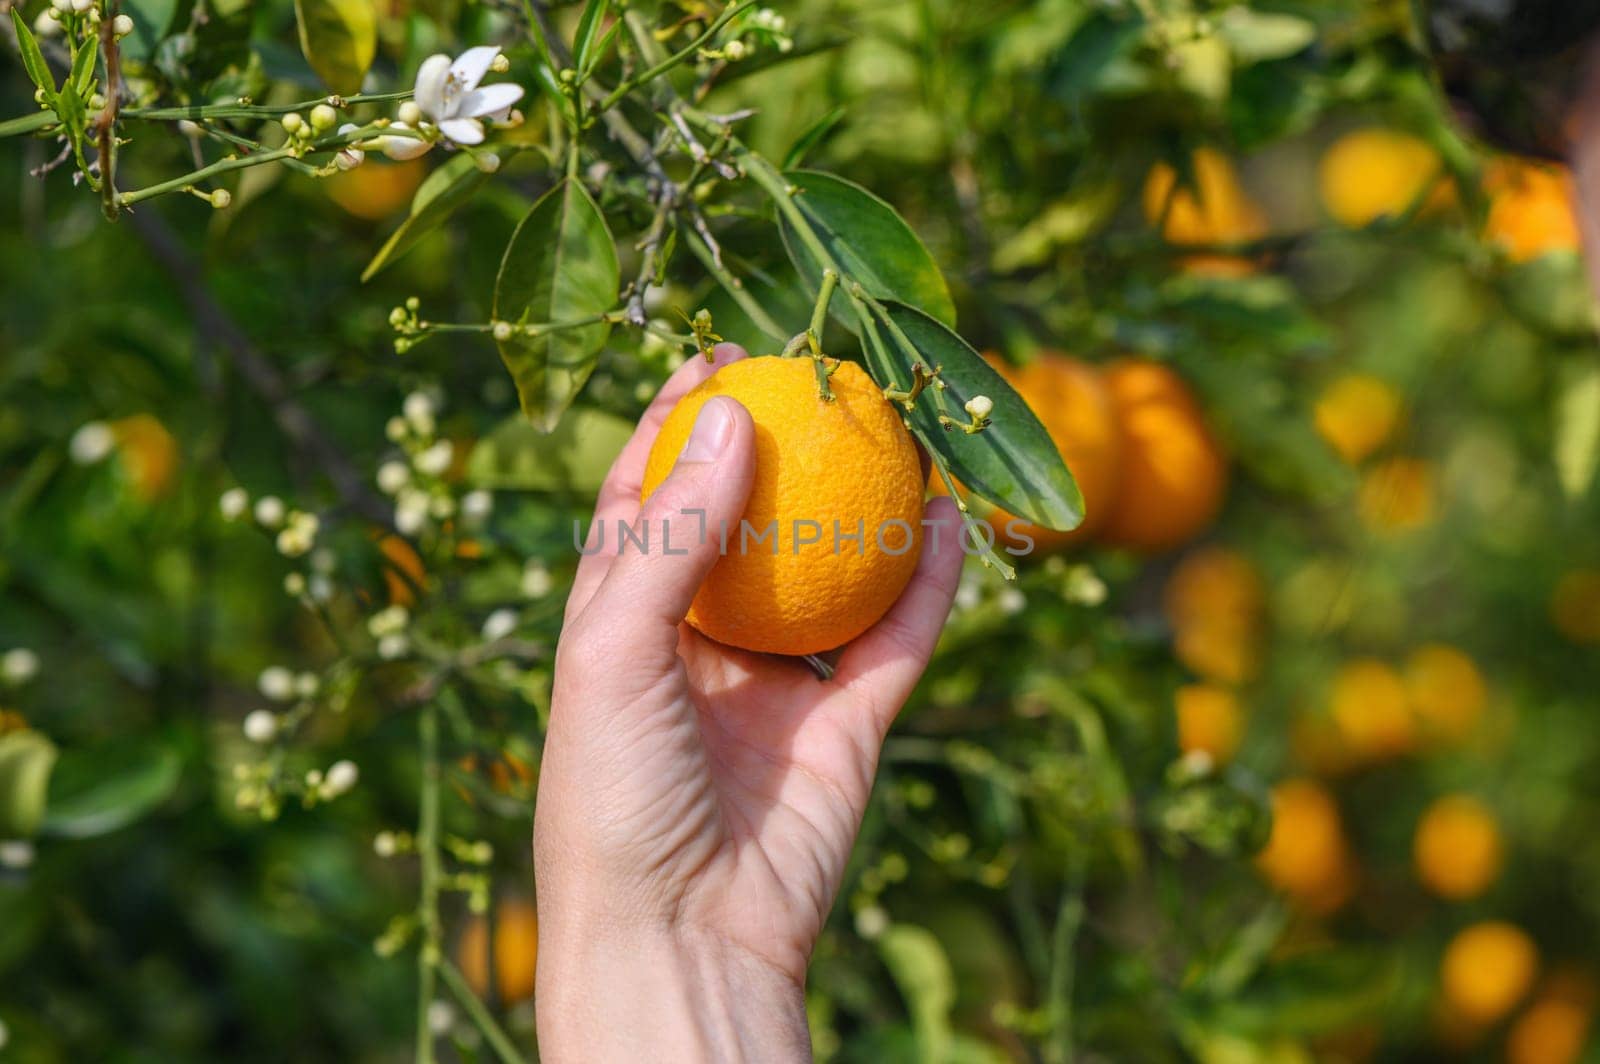 Women's hands pick juicy tasty oranges from a tree in the garden, harvesting on a sunny day.4